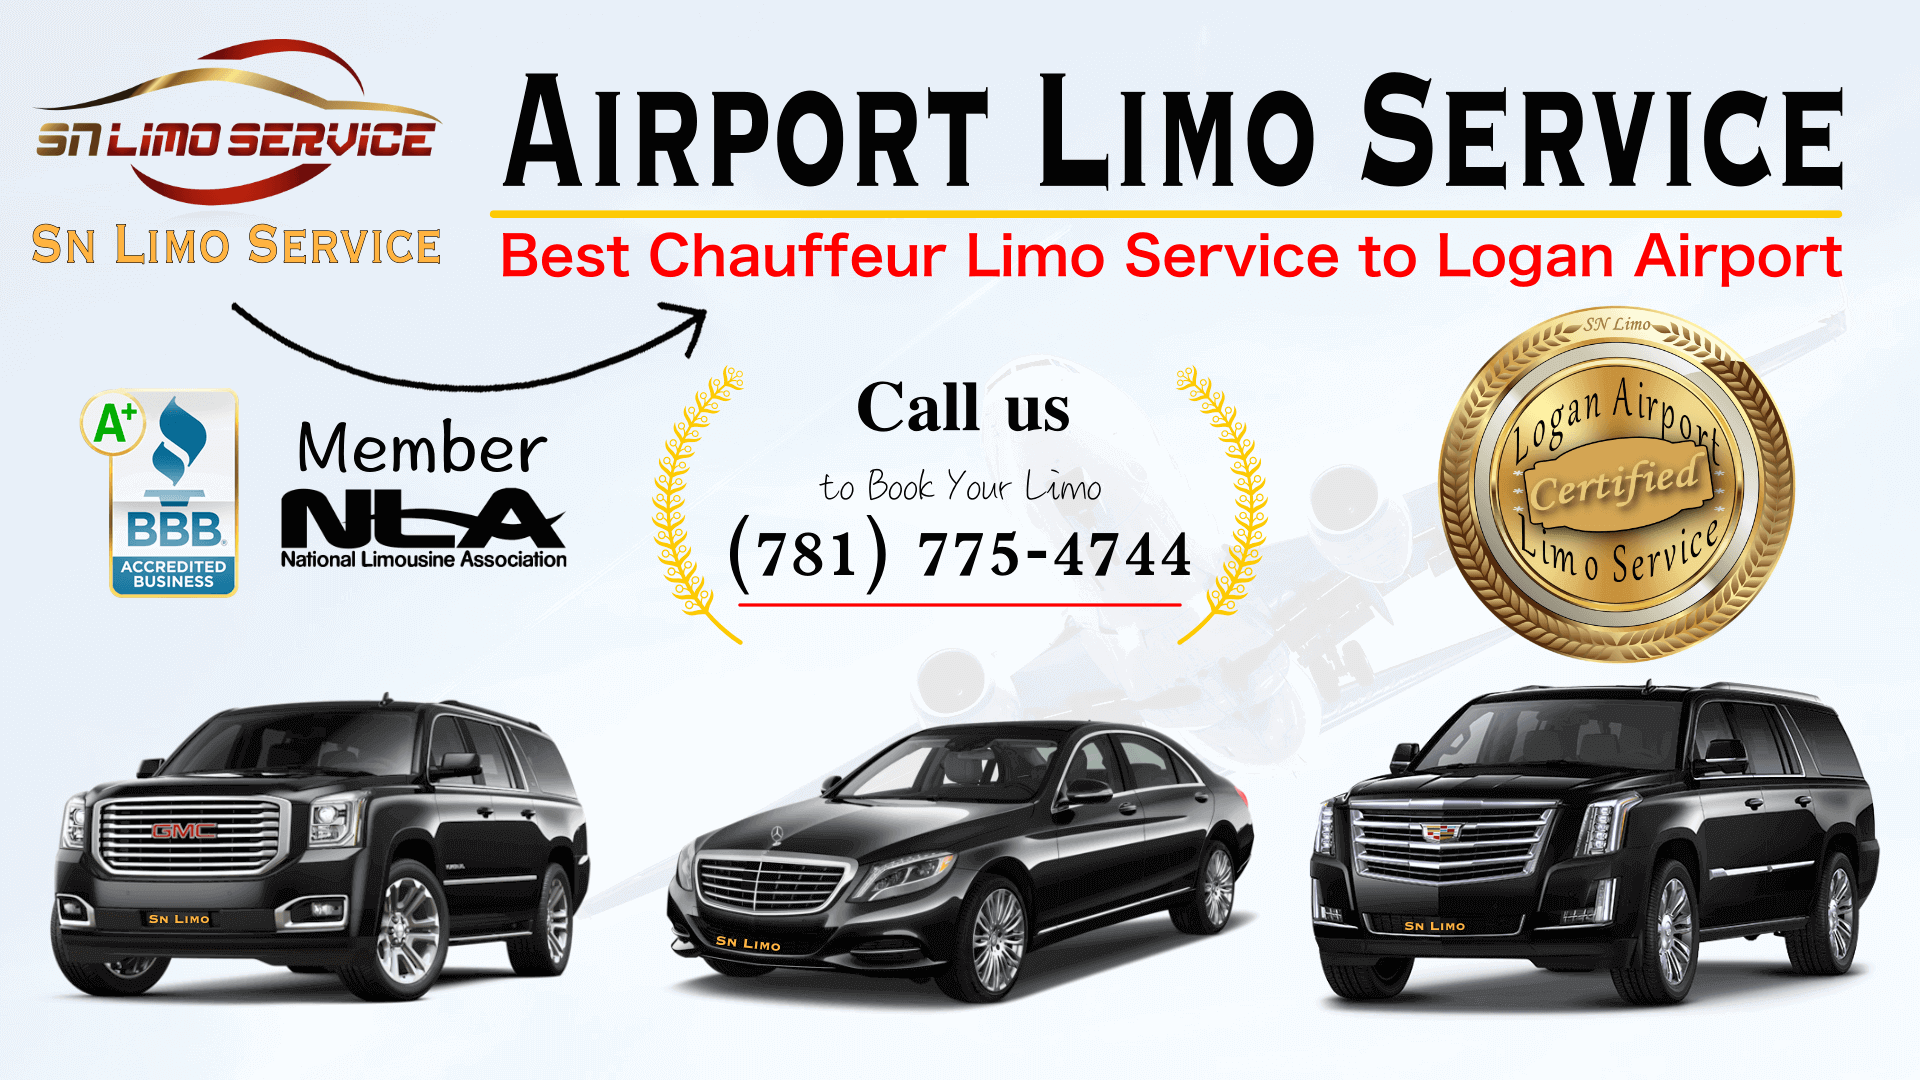 Airport-Limo-Service